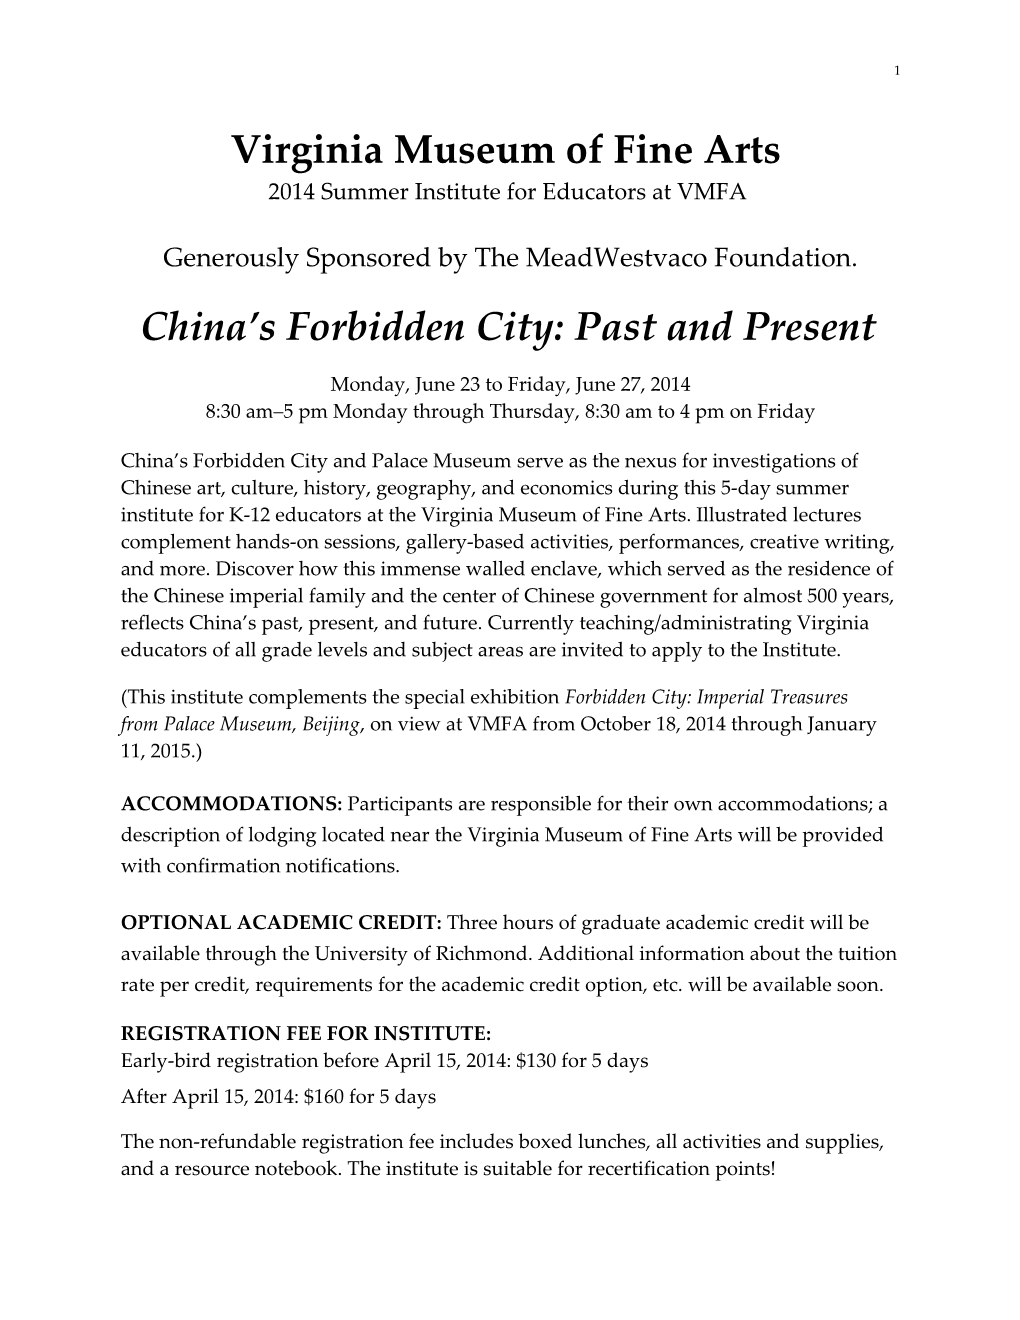 VAEA Newsletter Article March 1, 2008; Museum Director